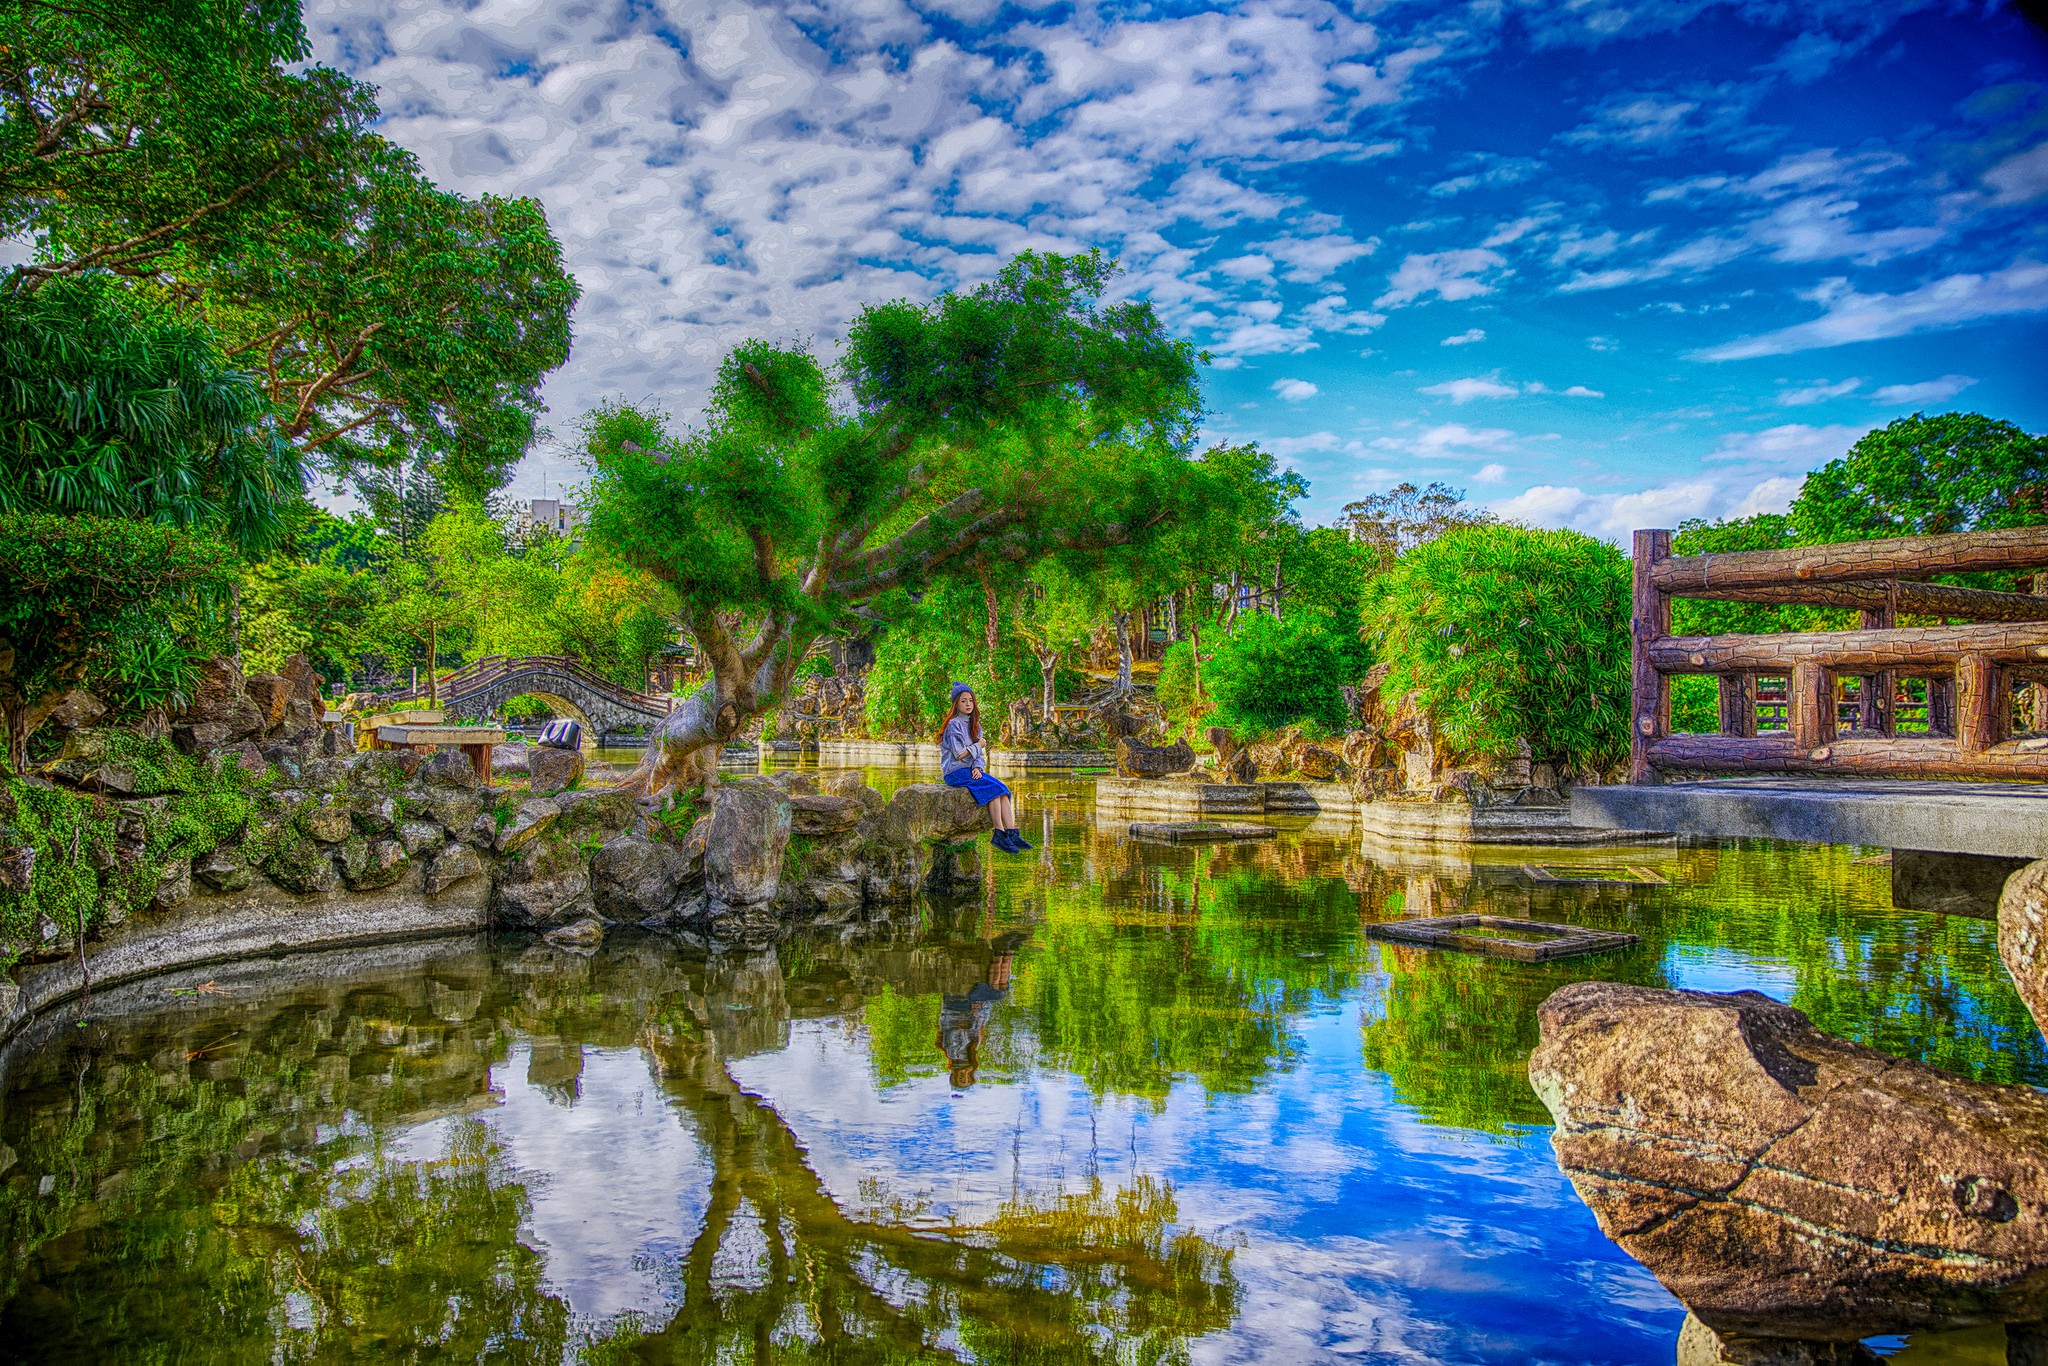 General 2048x1366 HDR park sitting water reflection clouds trees plants Asian women women outdoors model